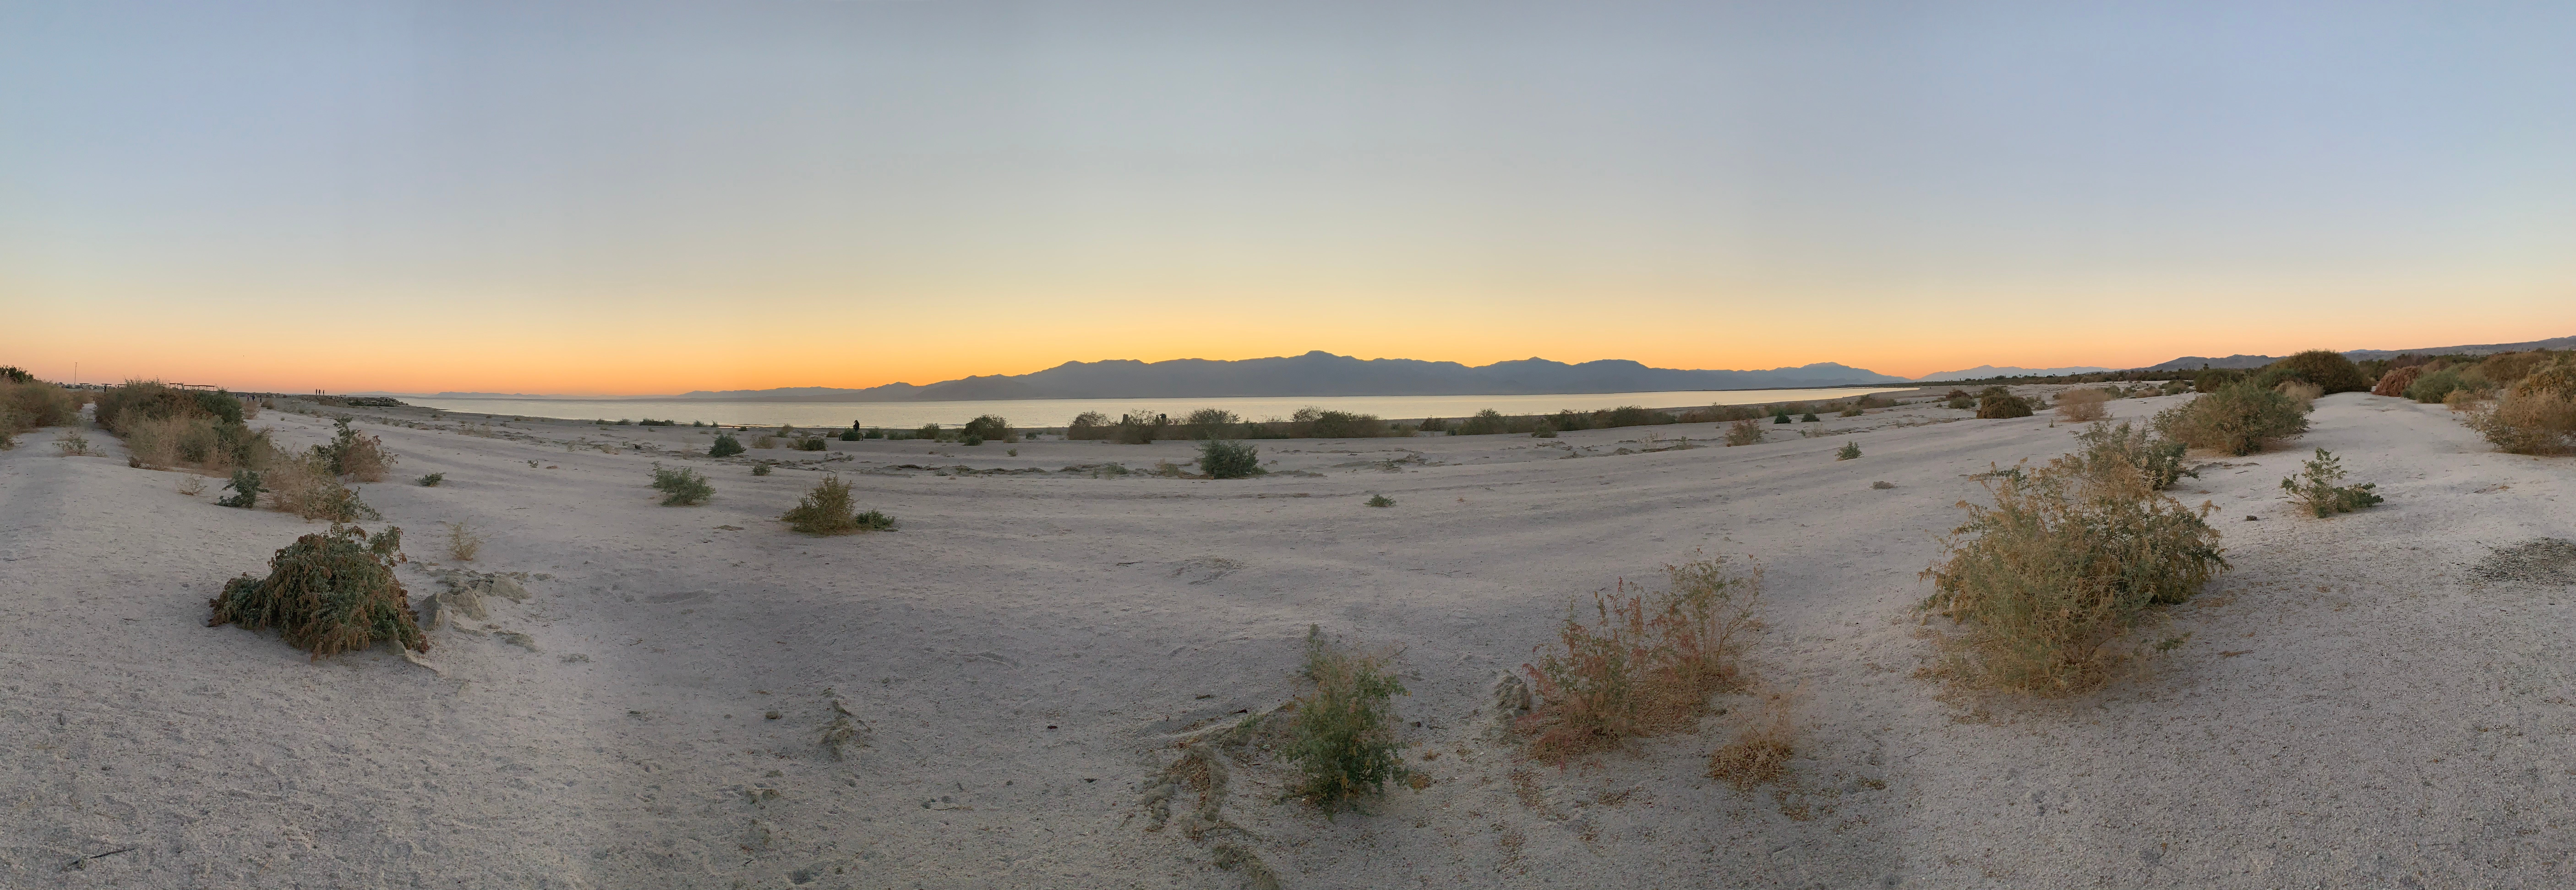 Camper submitted image from Salton Sea Sra - 1